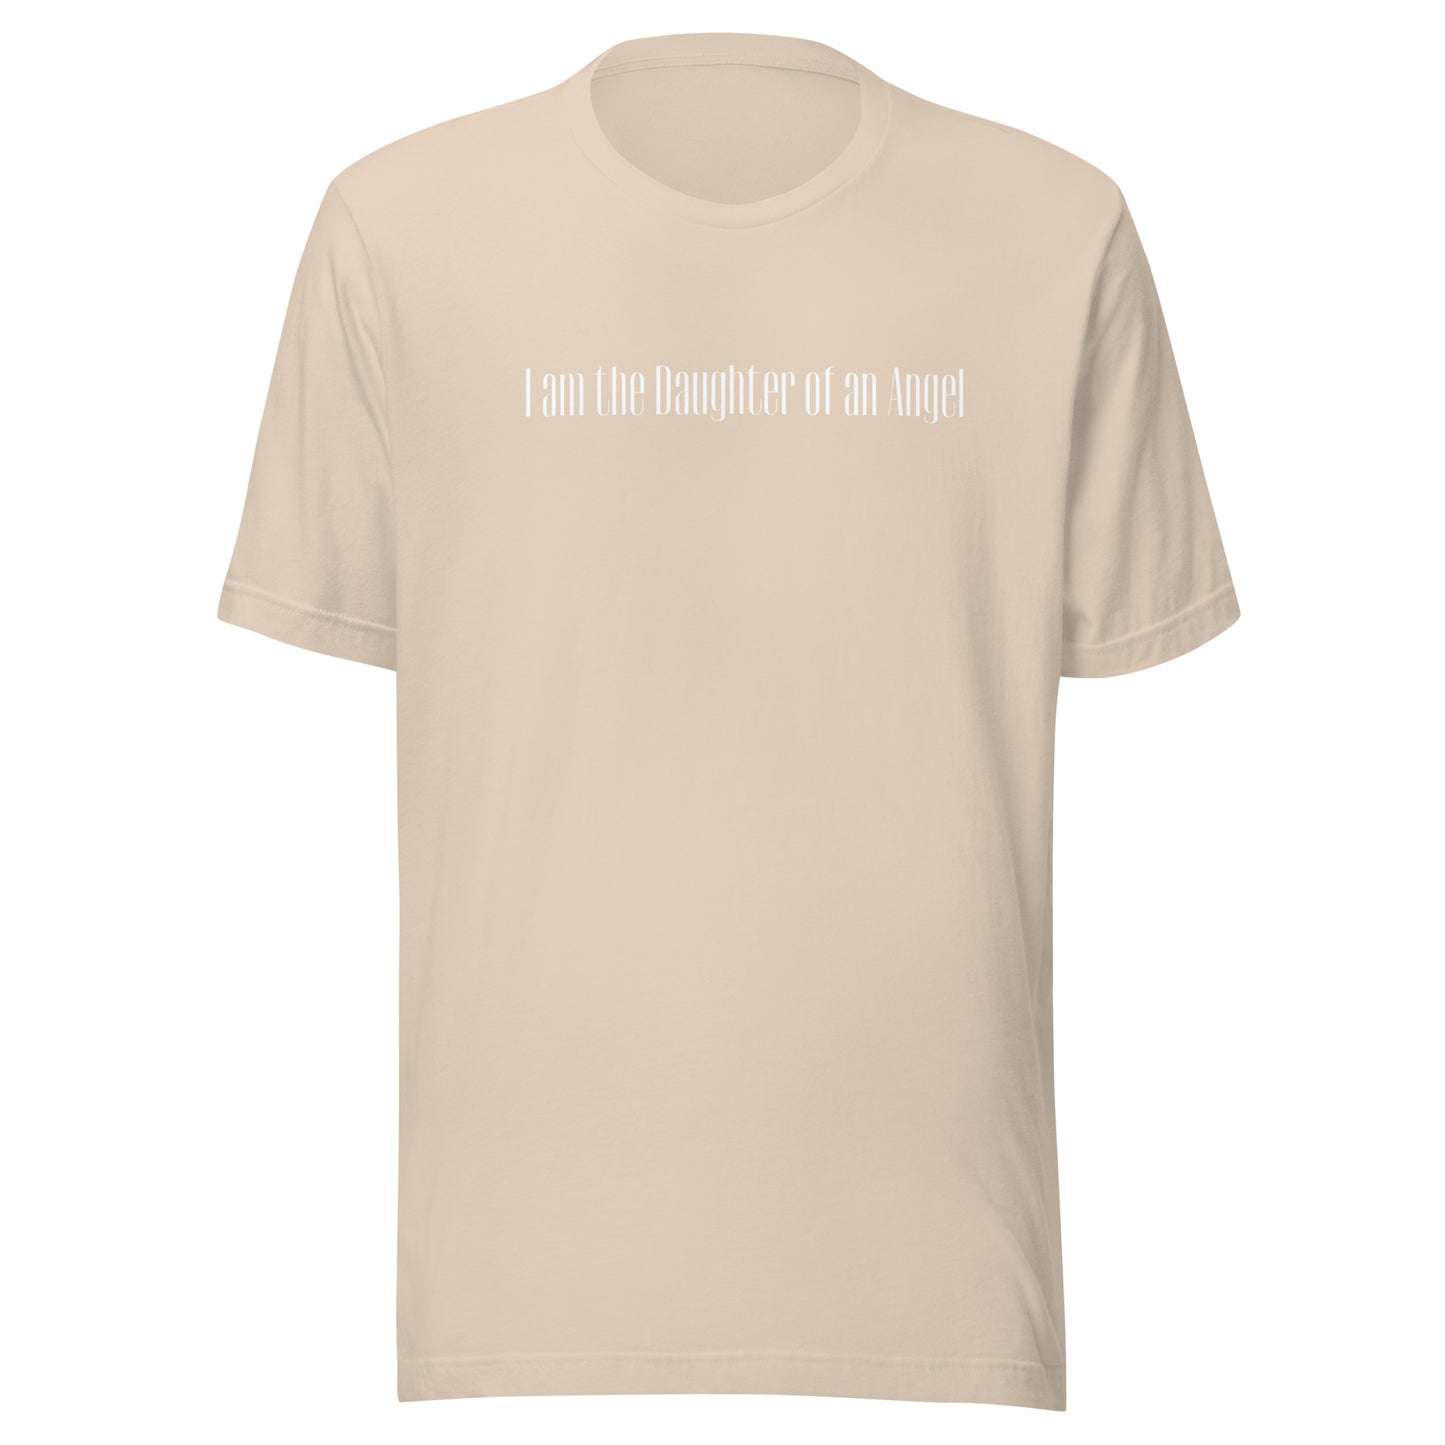 I AM THE DAUGHTER OF AN ANGEL TEE